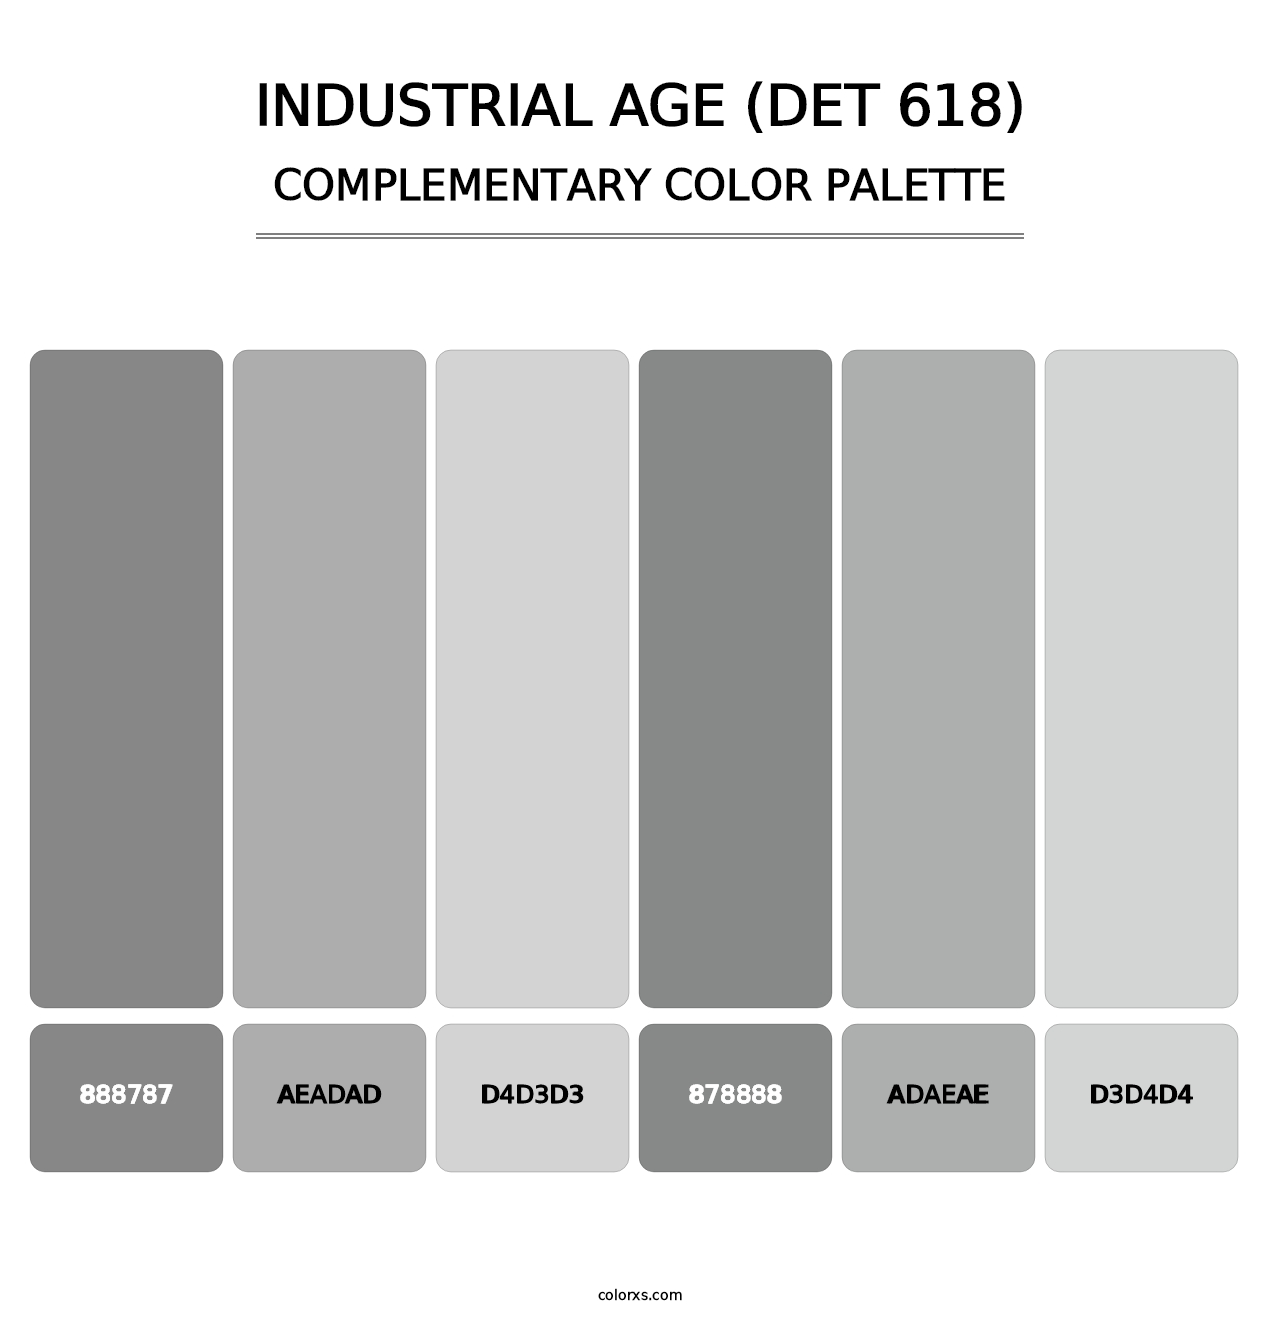 Industrial Age (DET 618) - Complementary Color Palette